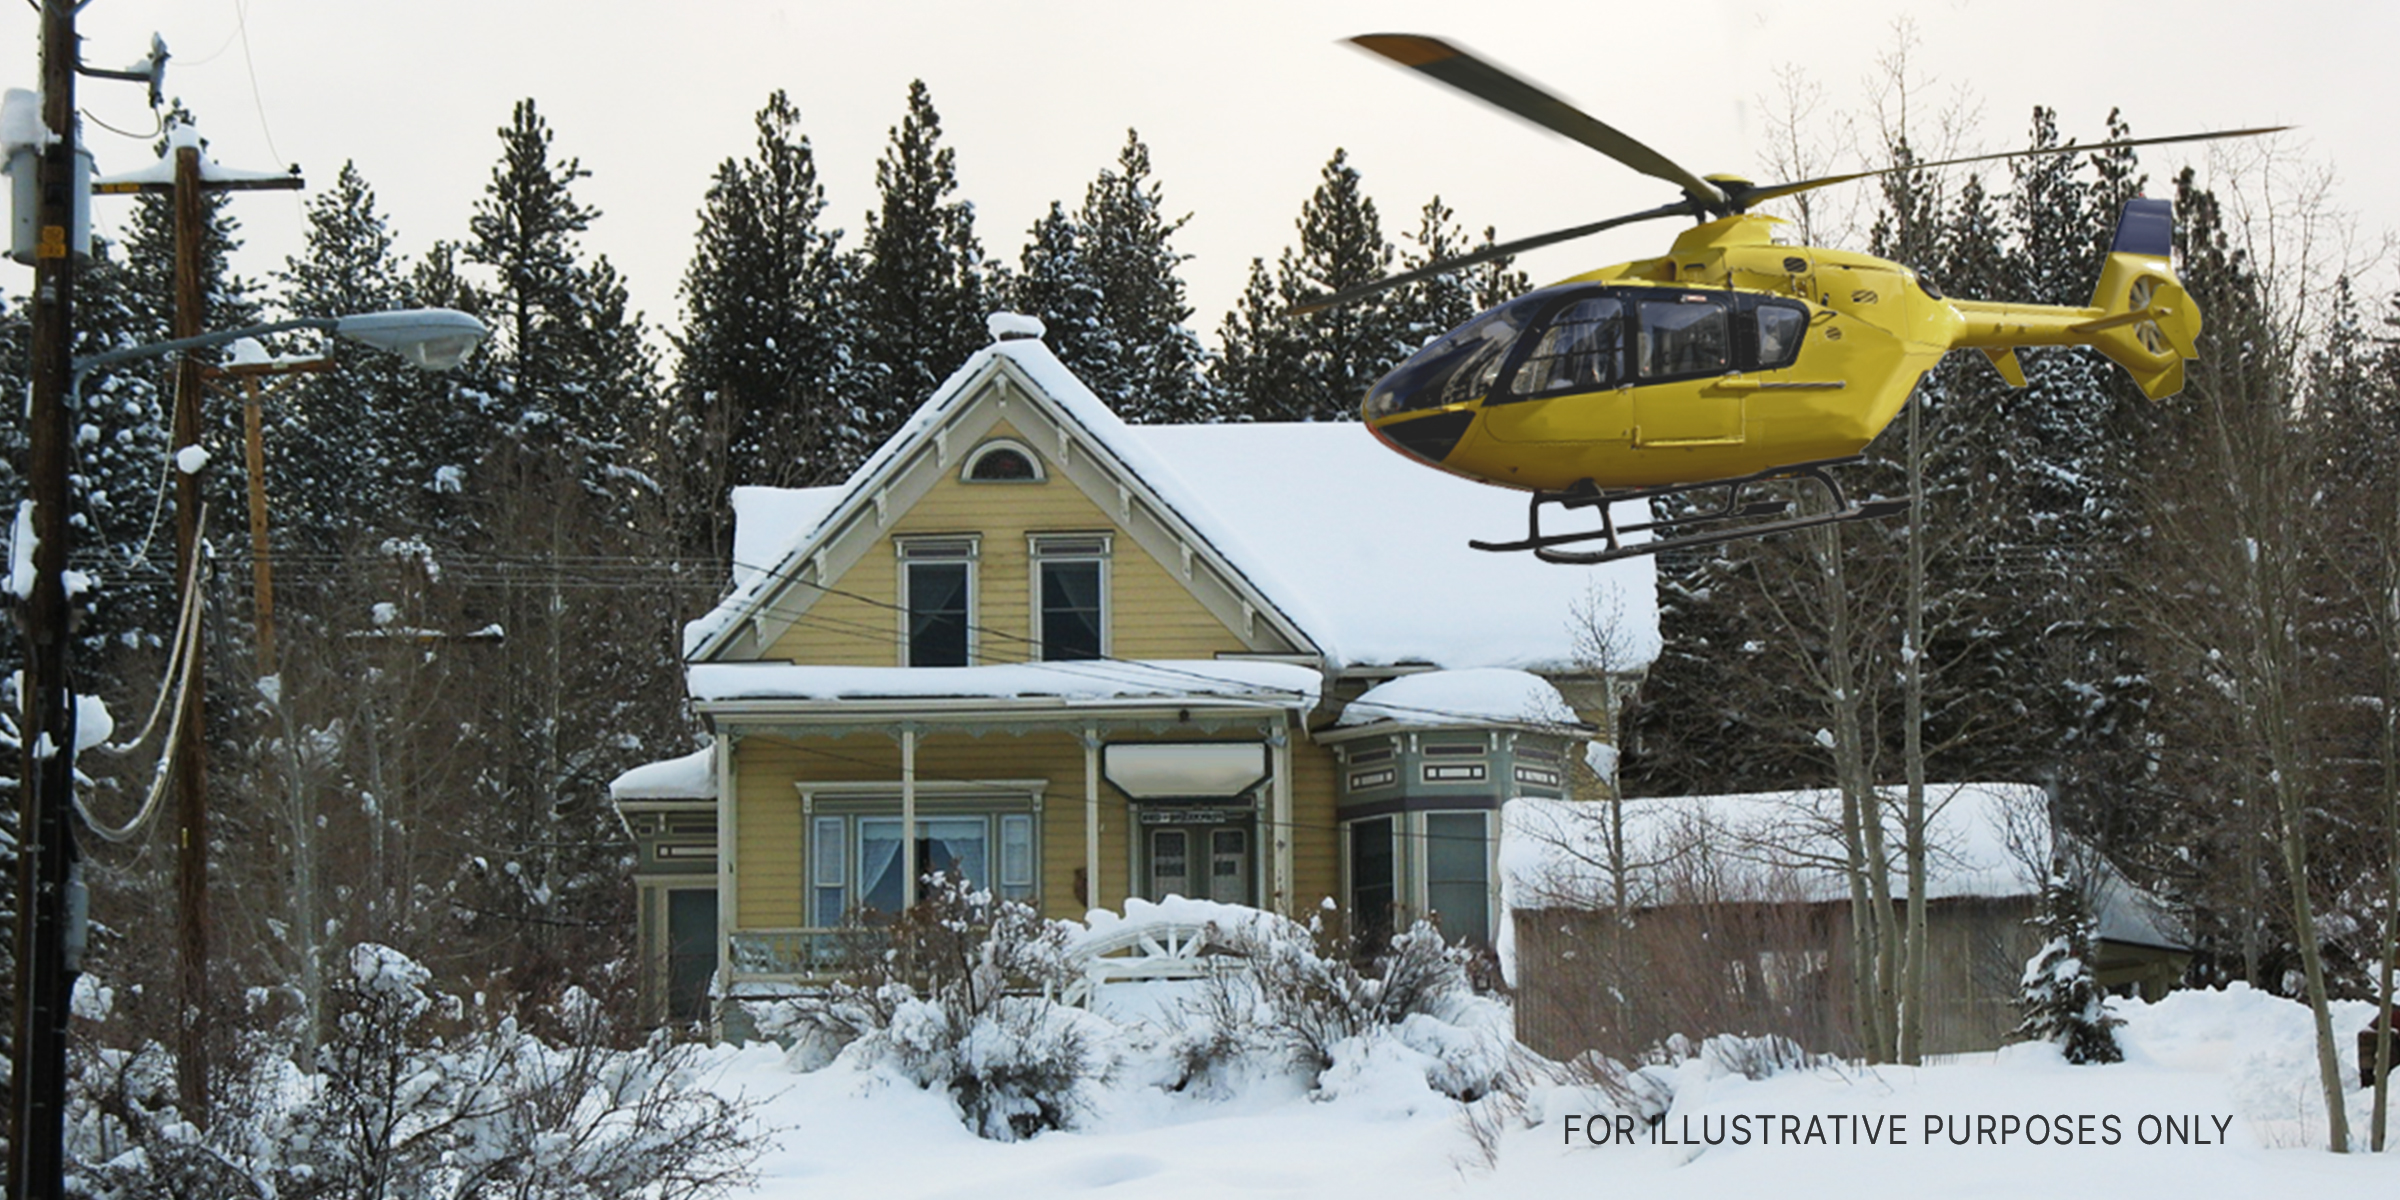 Helicopter Landing Near A House. | Source: Flickr/teofilo (CC BY 2.0)&Shutterstock